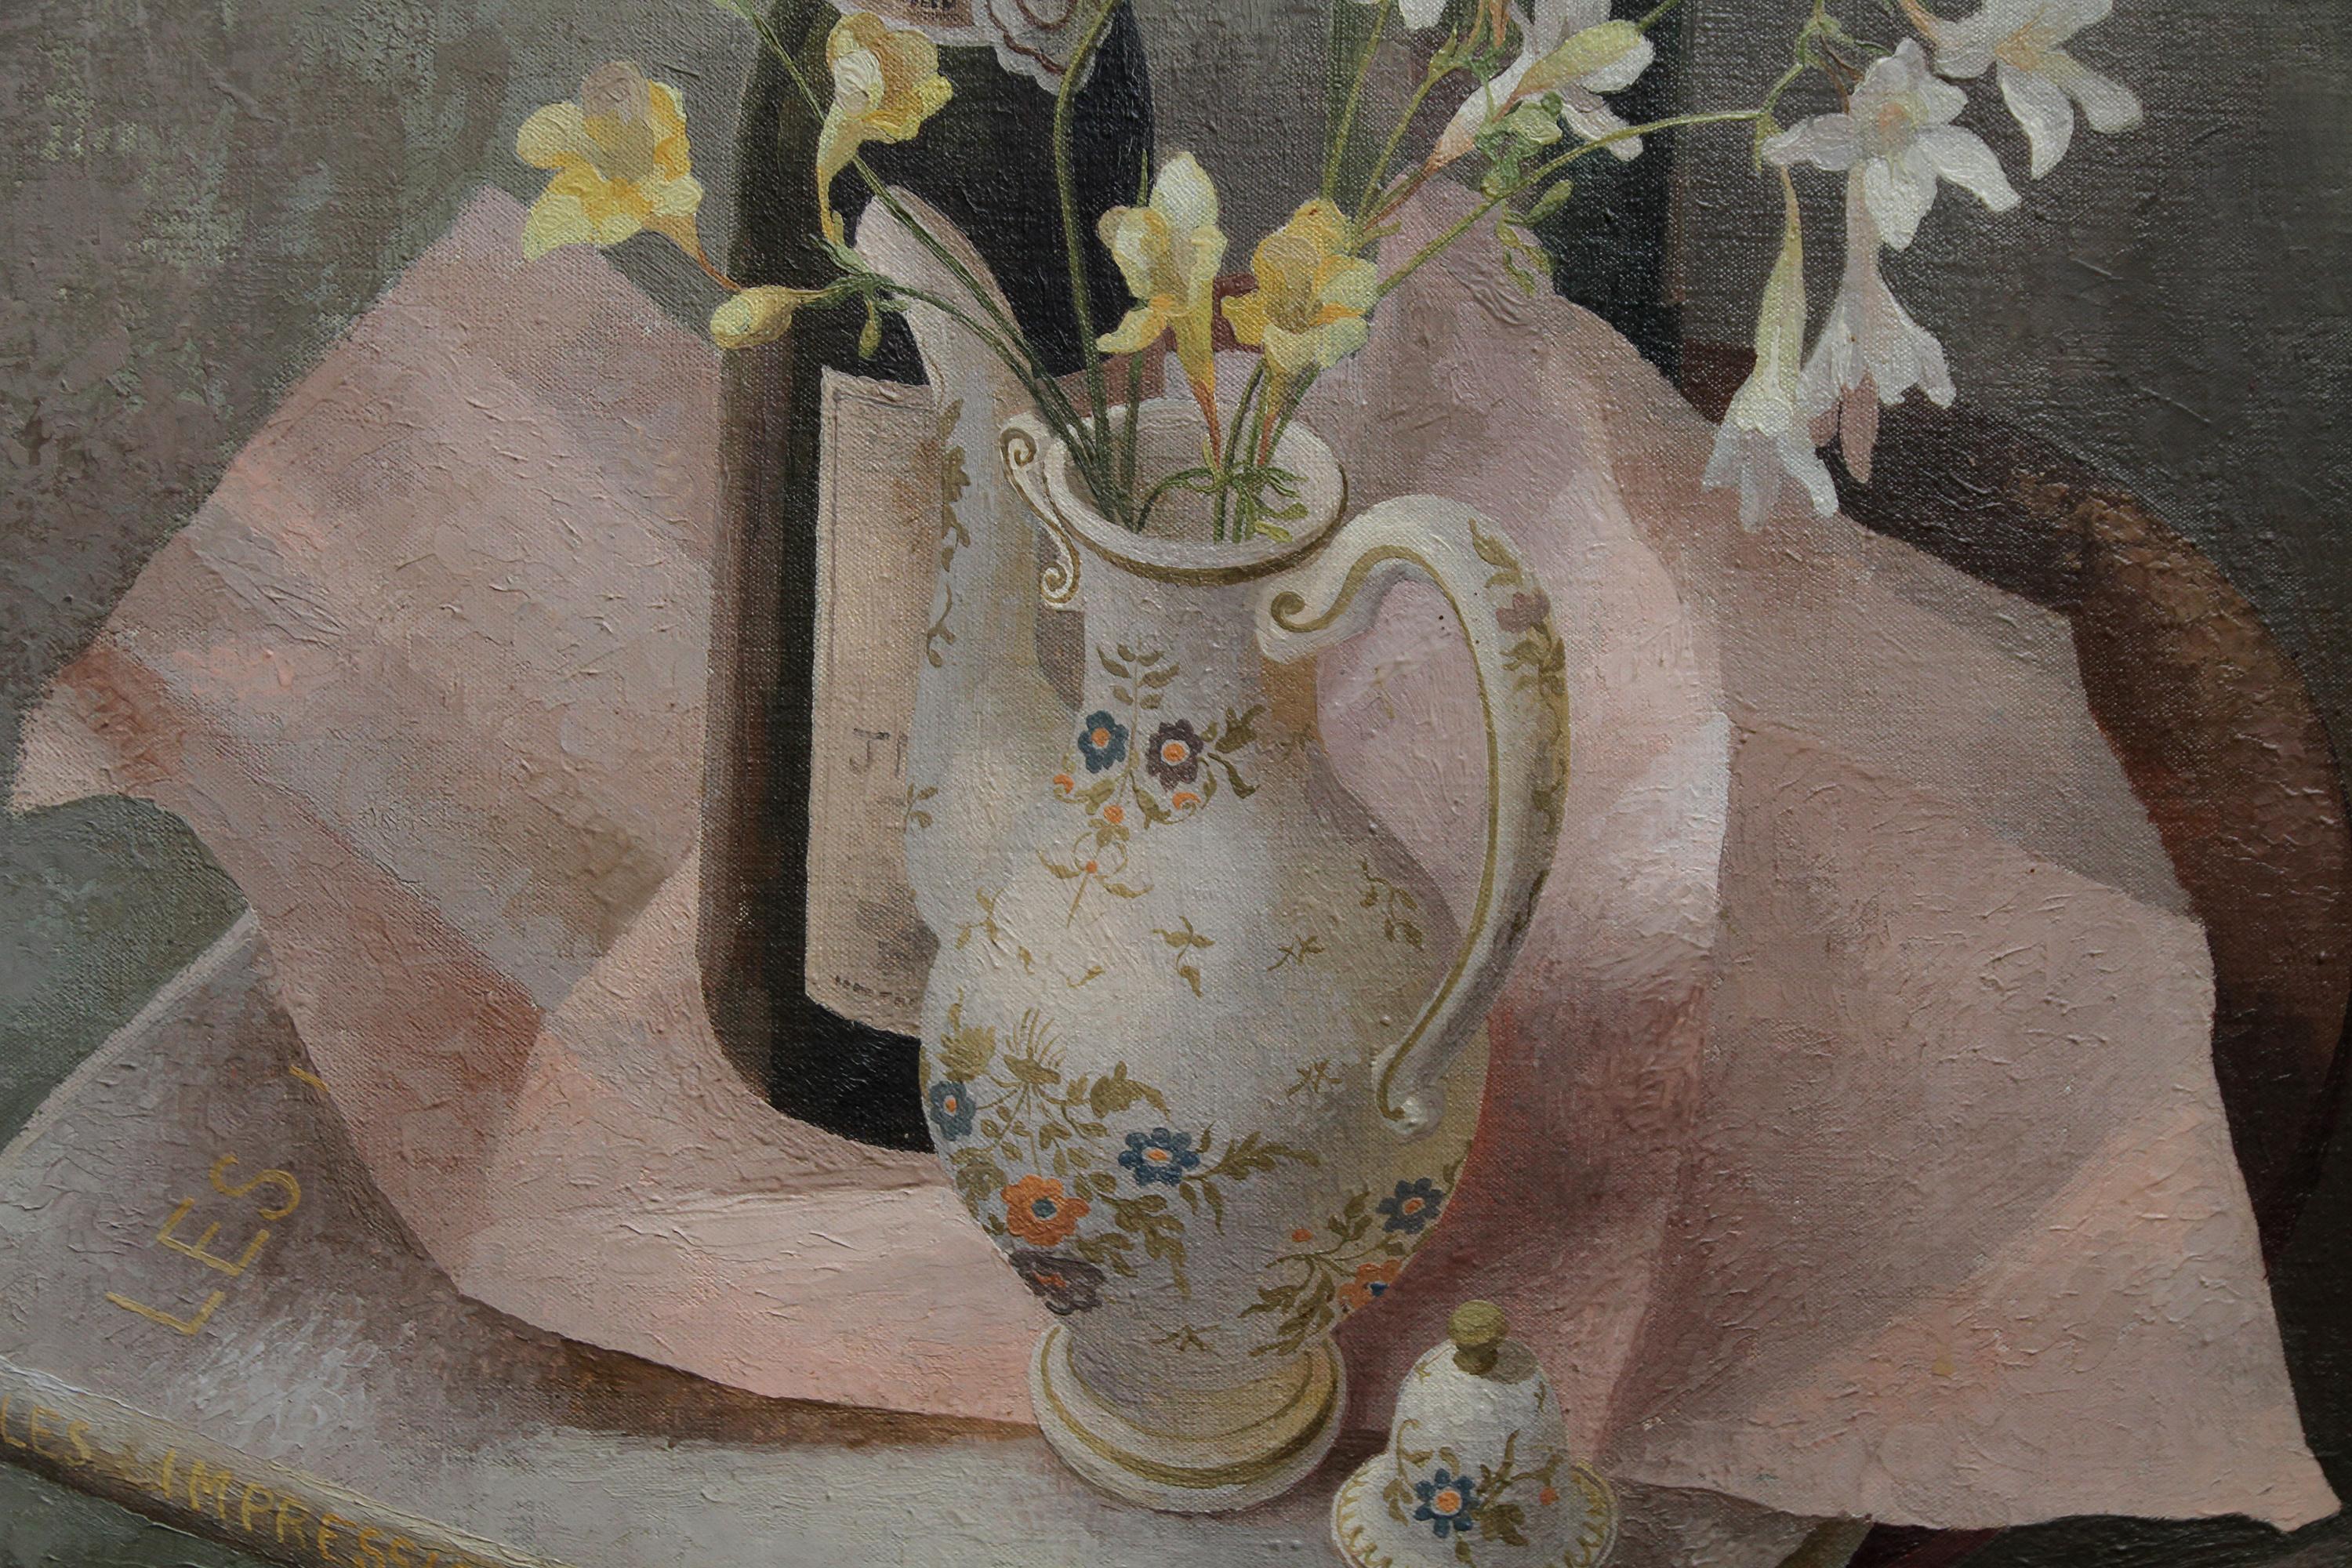 A stunning British RA exhibited still life oil painting by artist Mary Kent Harrison who exhibited throughout her career. This stunning oil is a bold, adventurous and confident still life floral arrangement around The French Coffee Pot. This is an